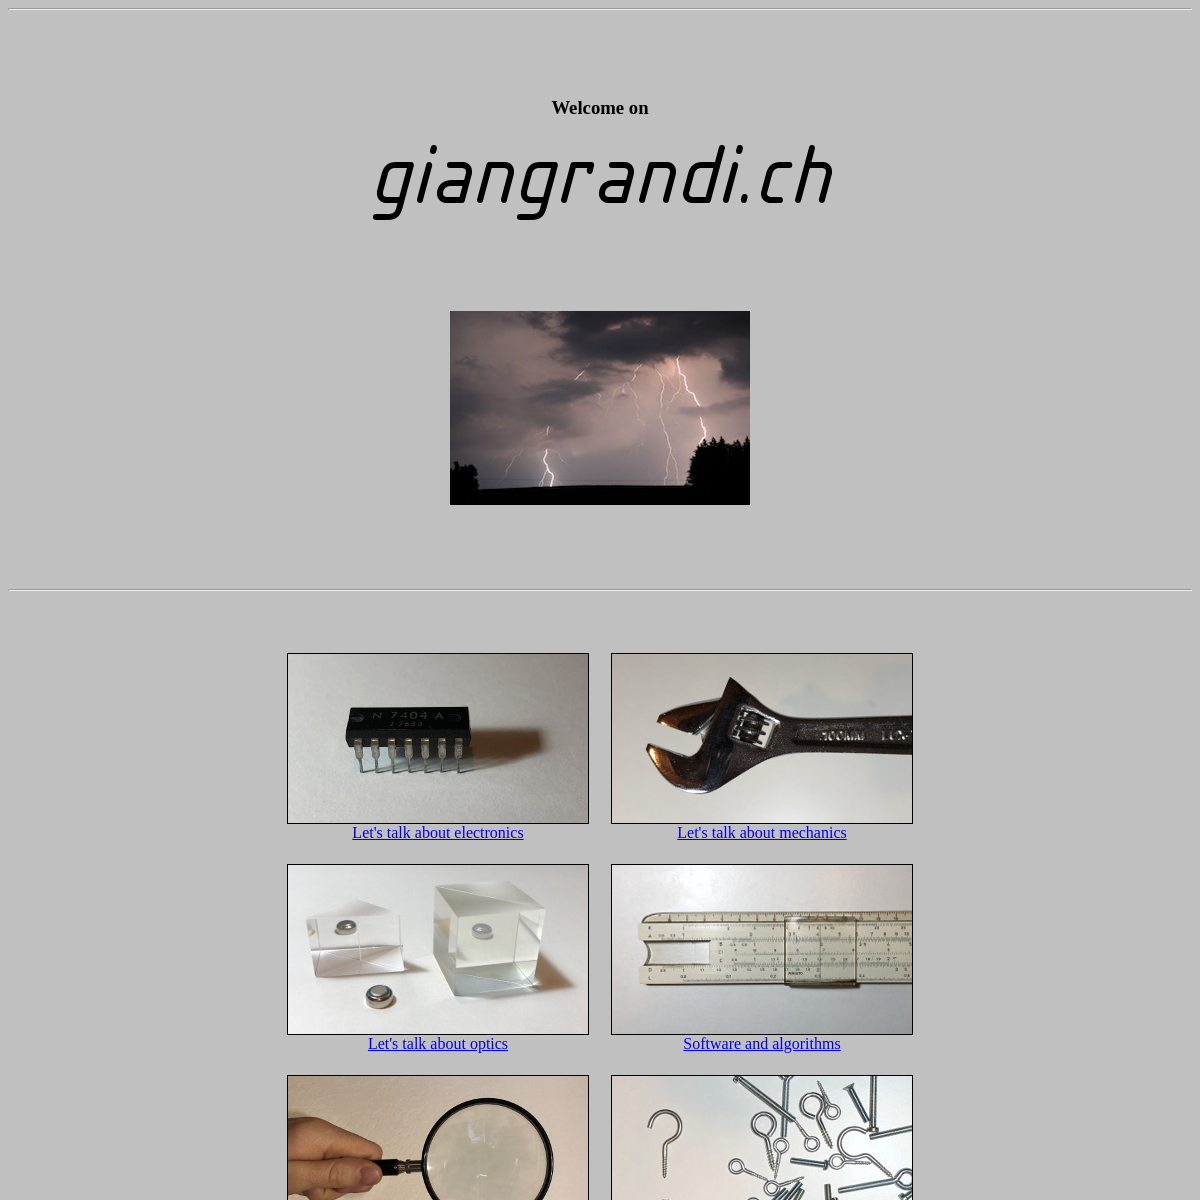 A complete backup of giangrandi.ch